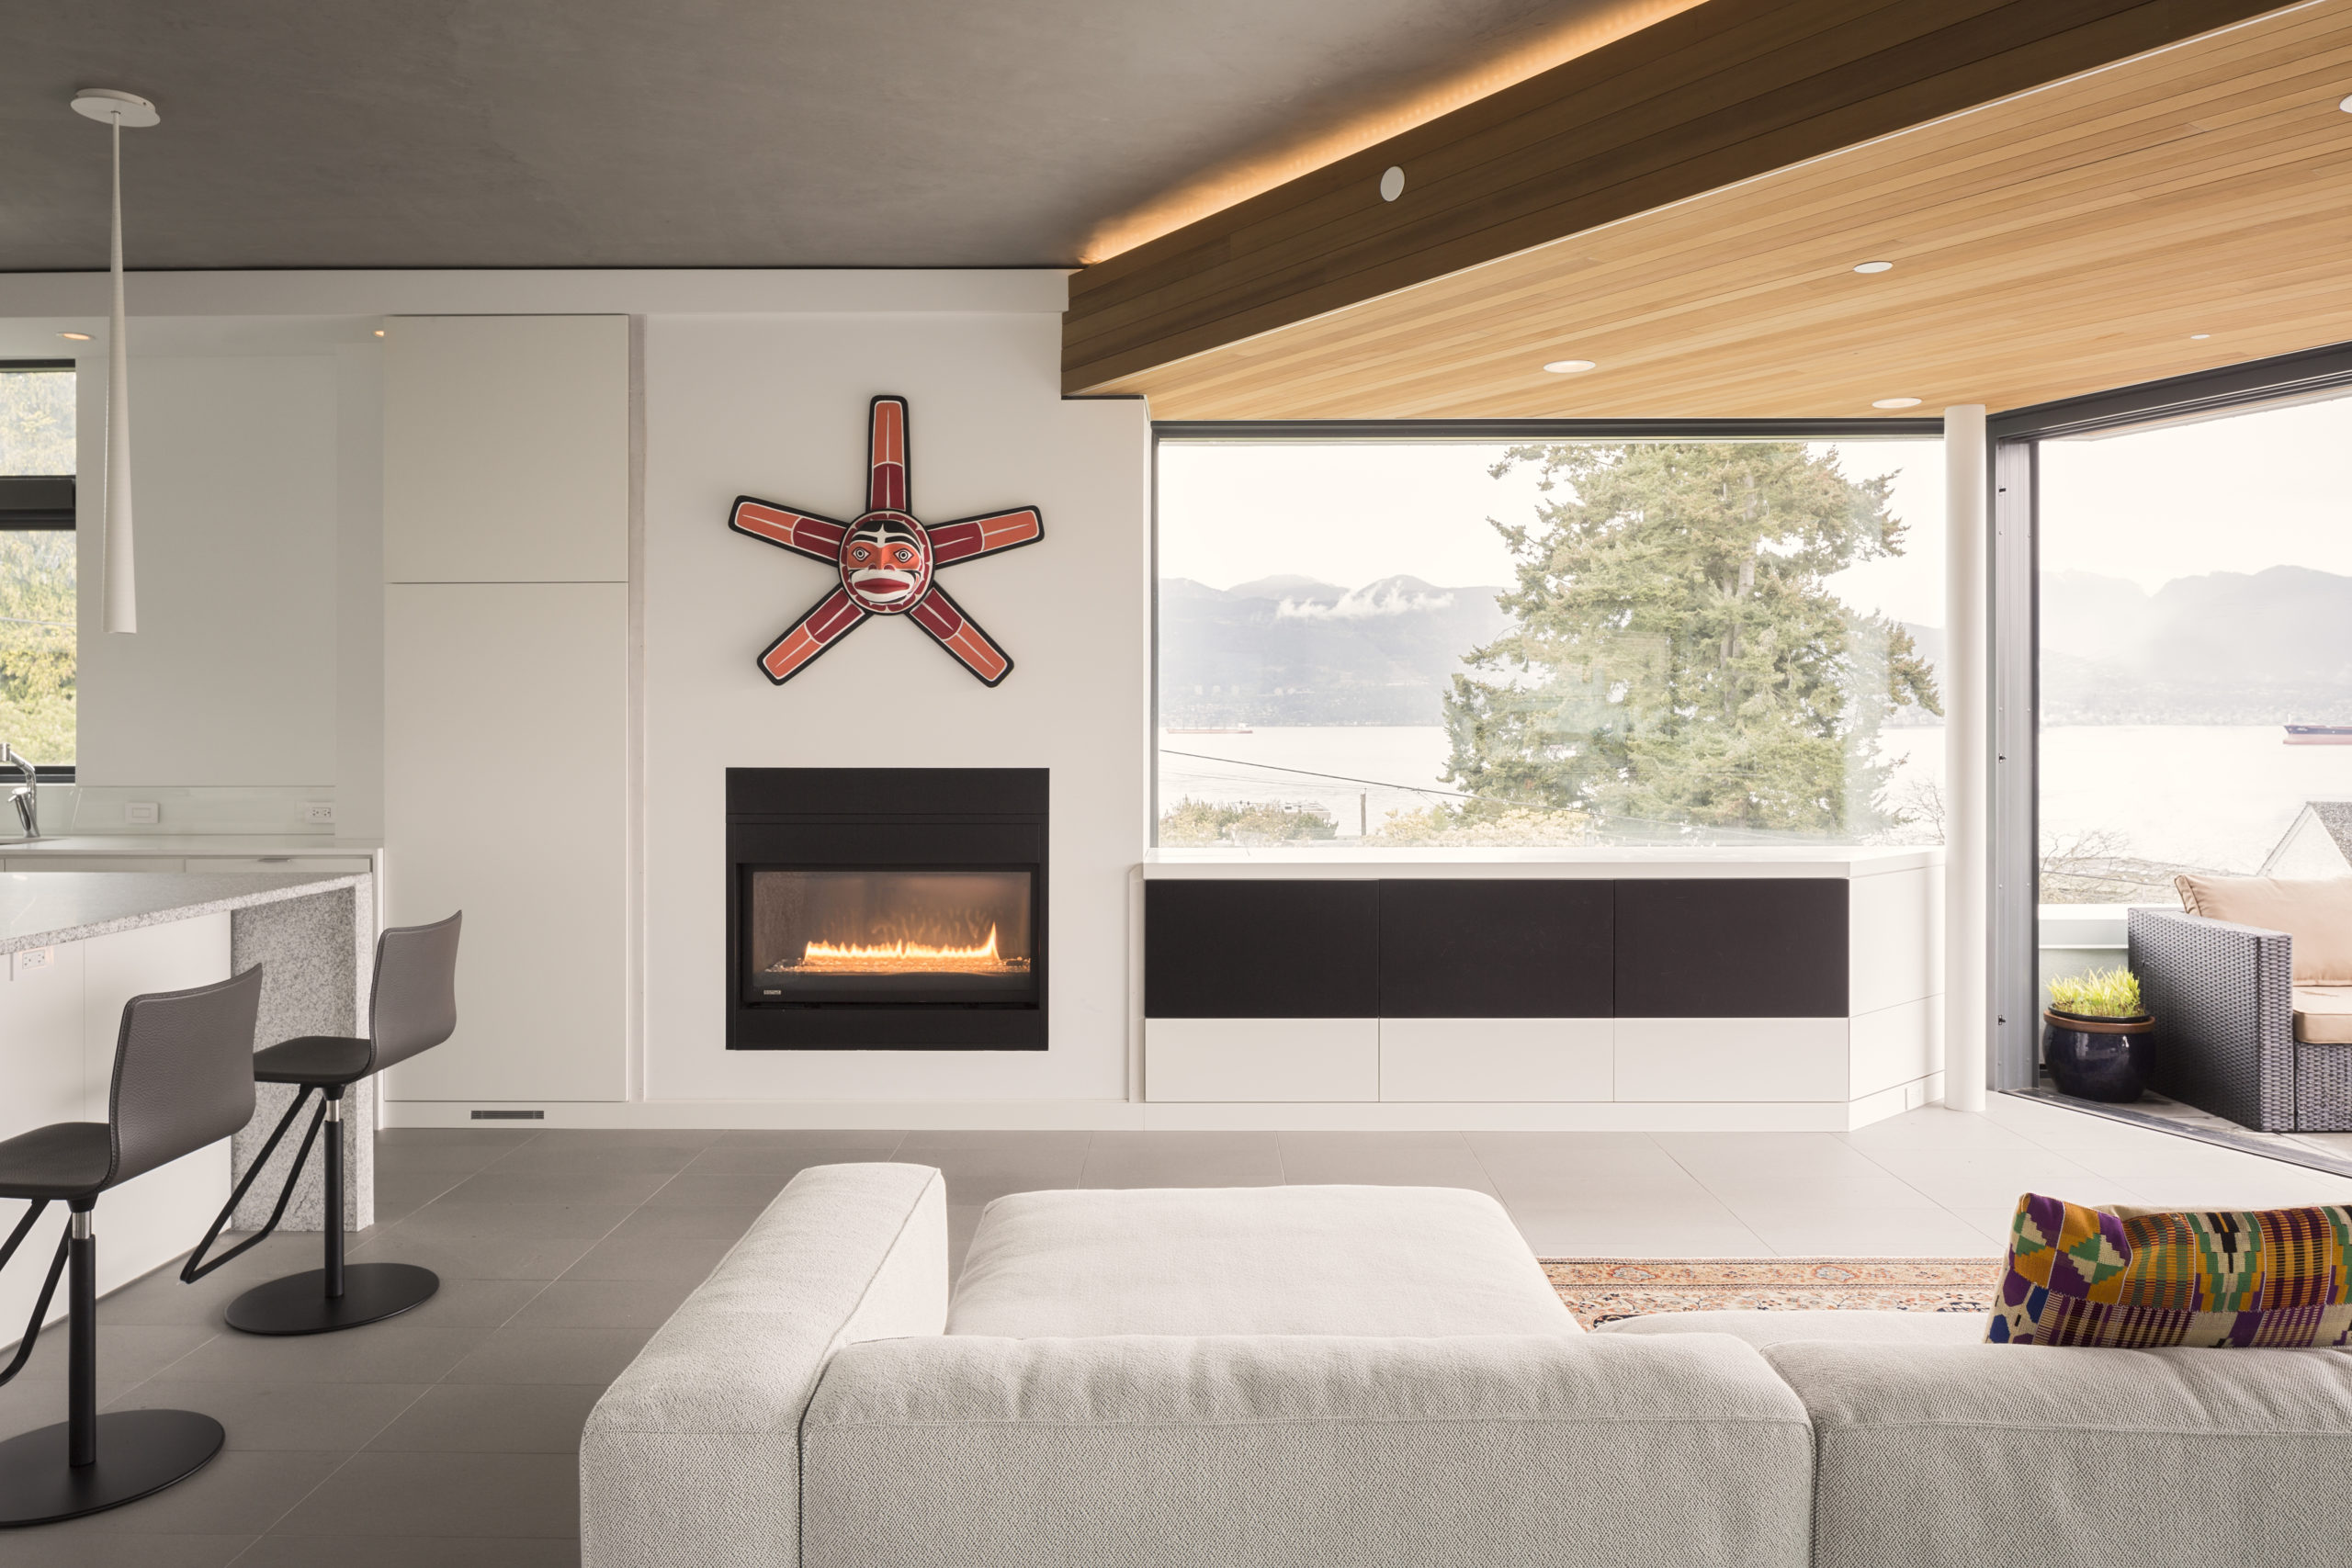 Modern design of a living rooom at a custom home in Spanish Banks.